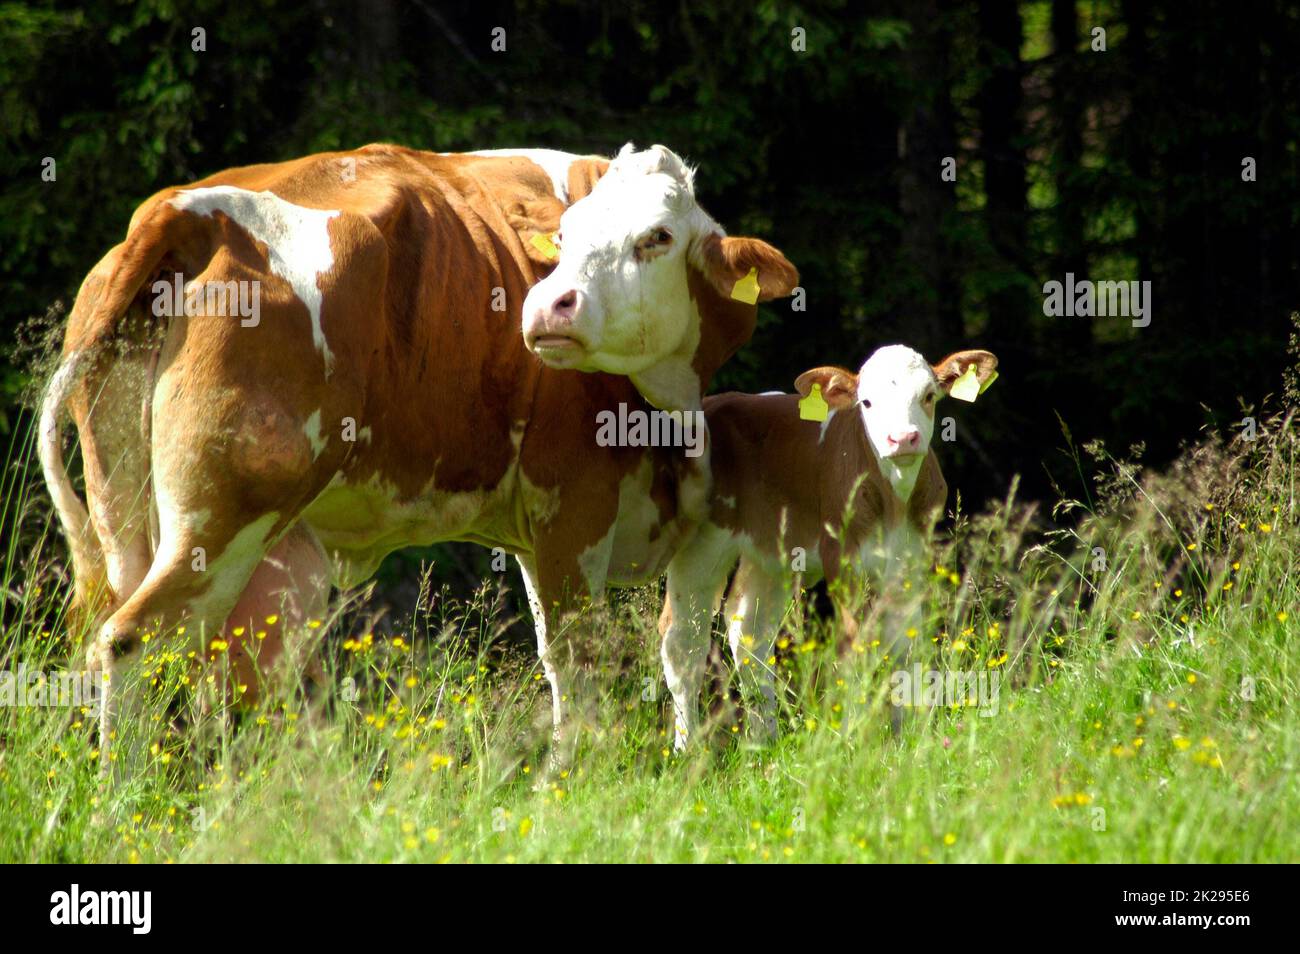 Animal husbandry, cows grazing on a green meadow Stock Photo